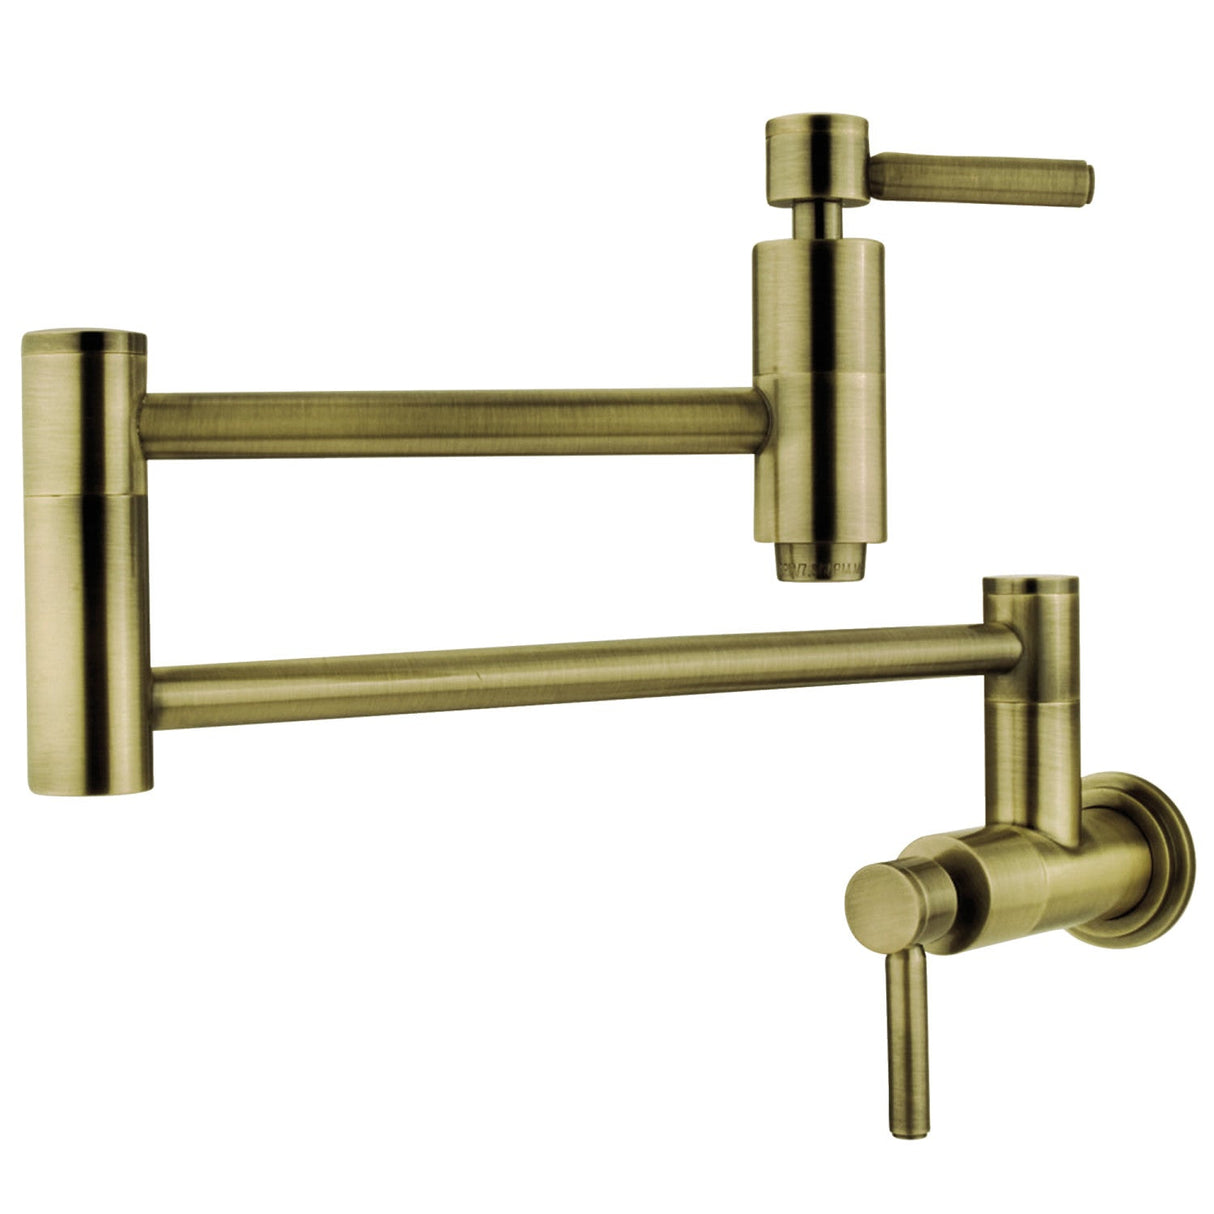 Concord KS8103DL Two-Handle 1-Hole Wall Mount Pot Filler, Antique Brass